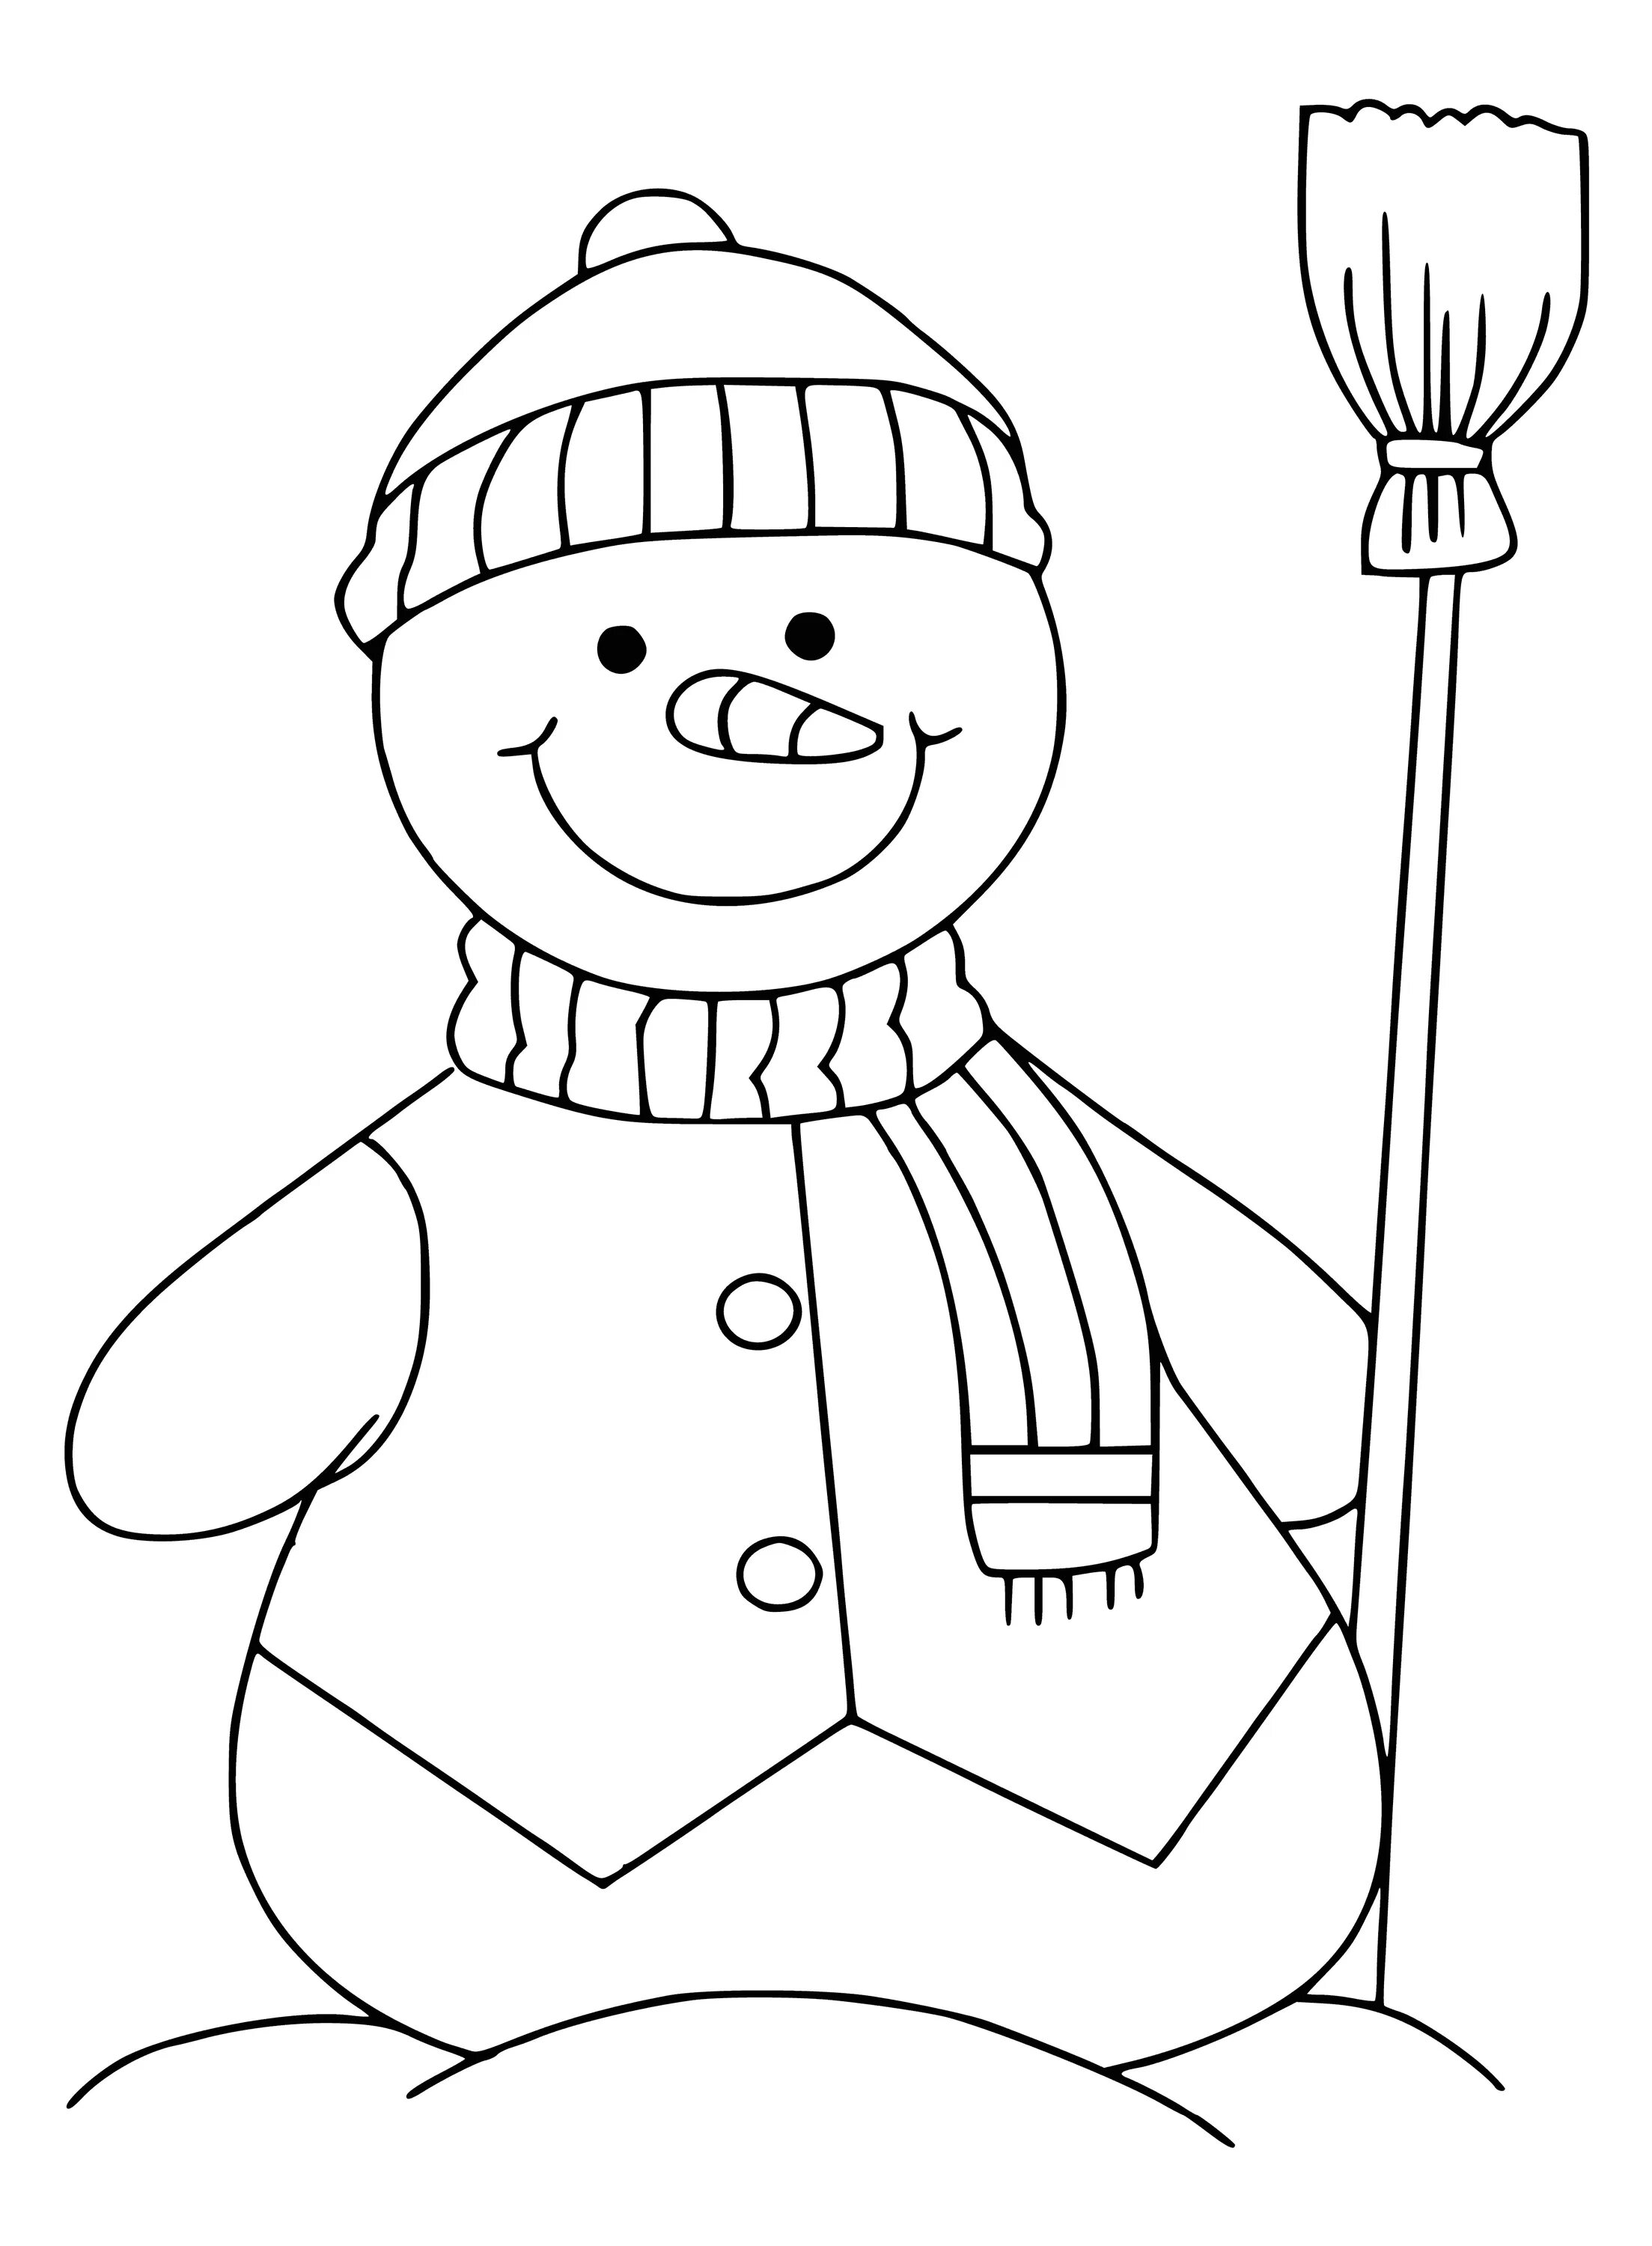 Funny snowman for kids #6